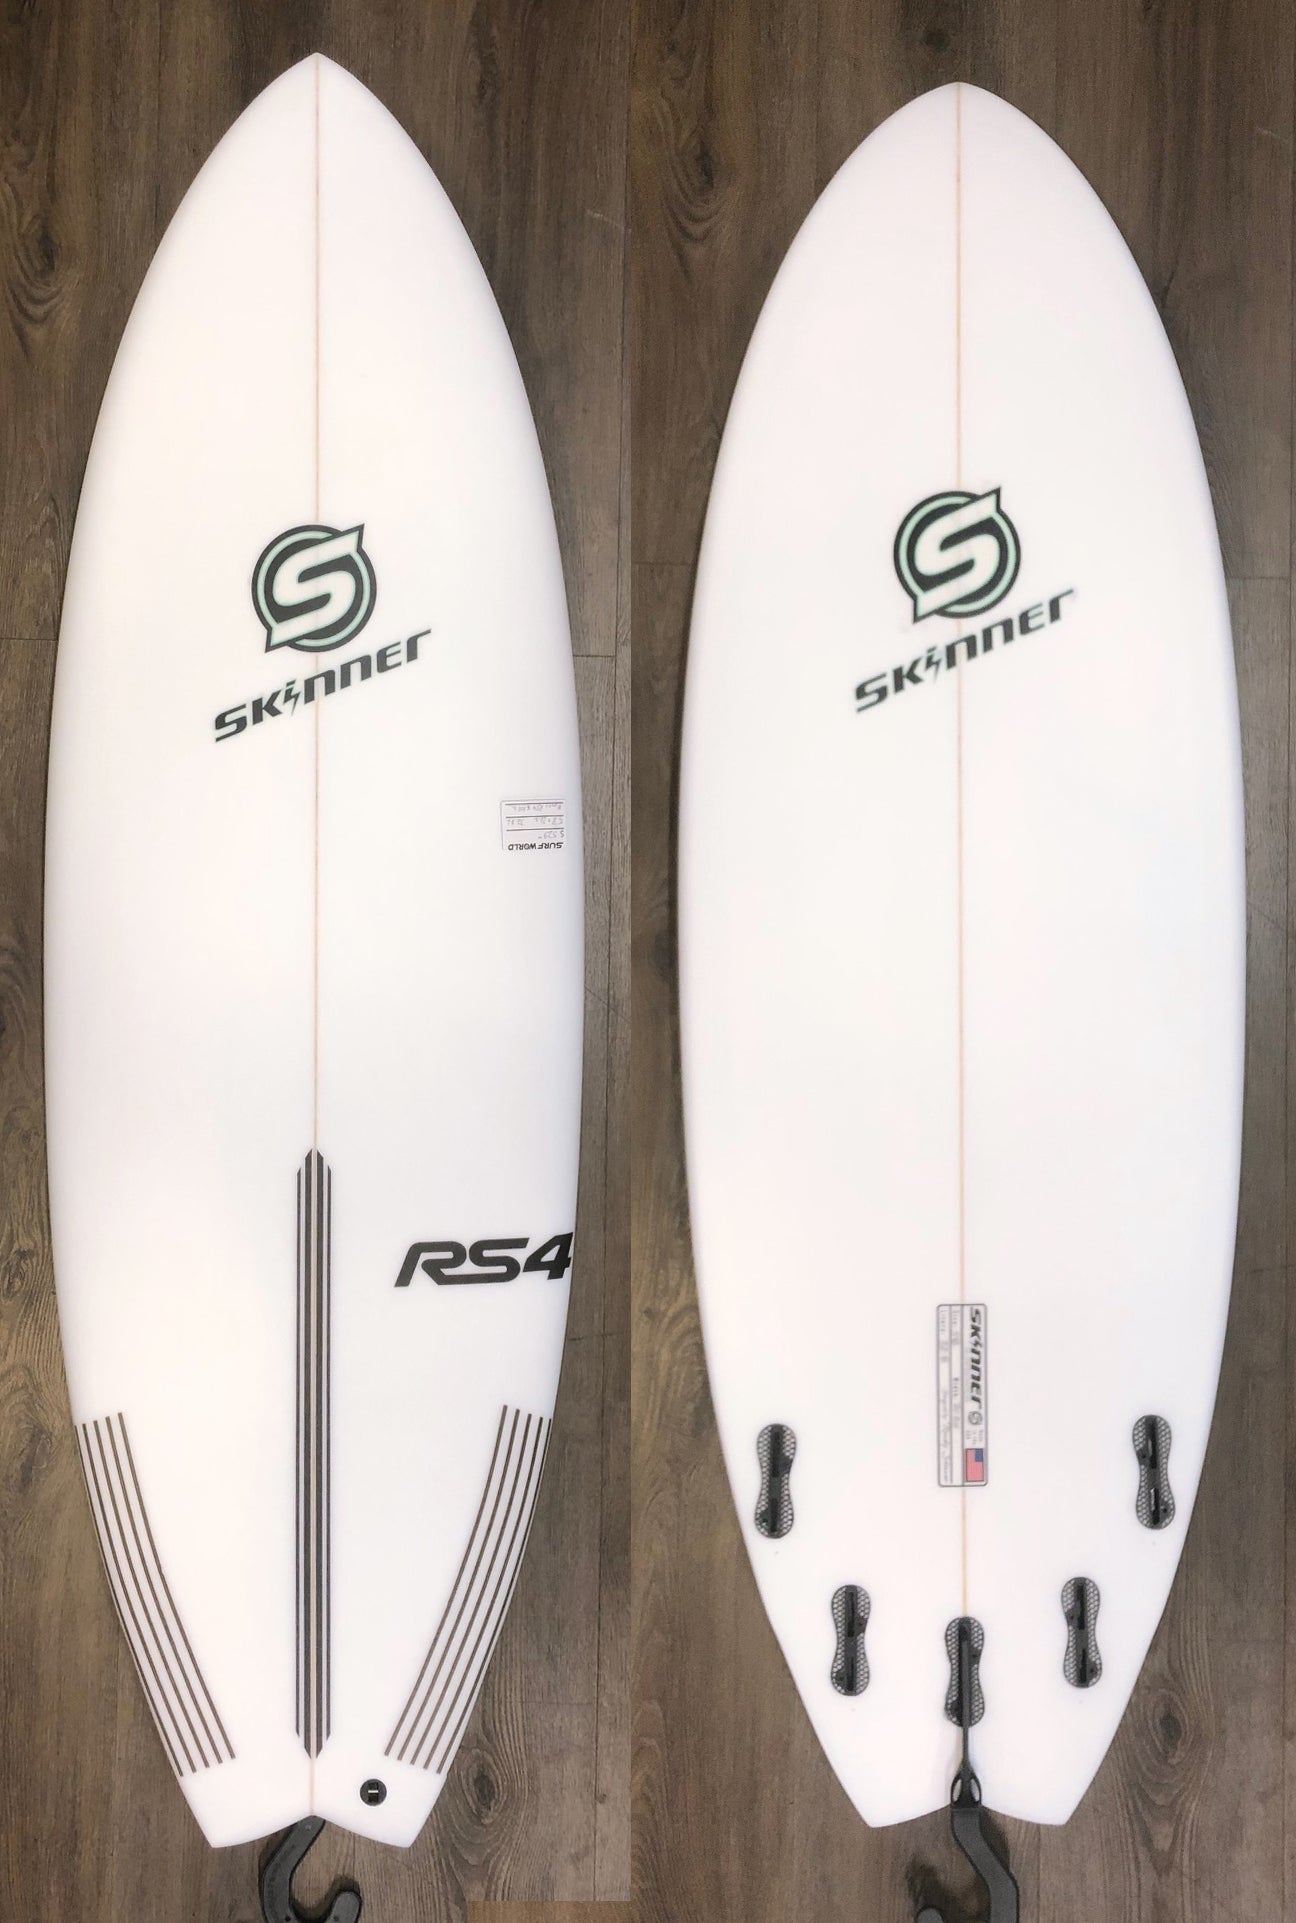 SOLD Skinner Surfboards 5'8 RS4 Fish 32.8 Liters 5 FCS2 Plugs Epoxy Surfboard